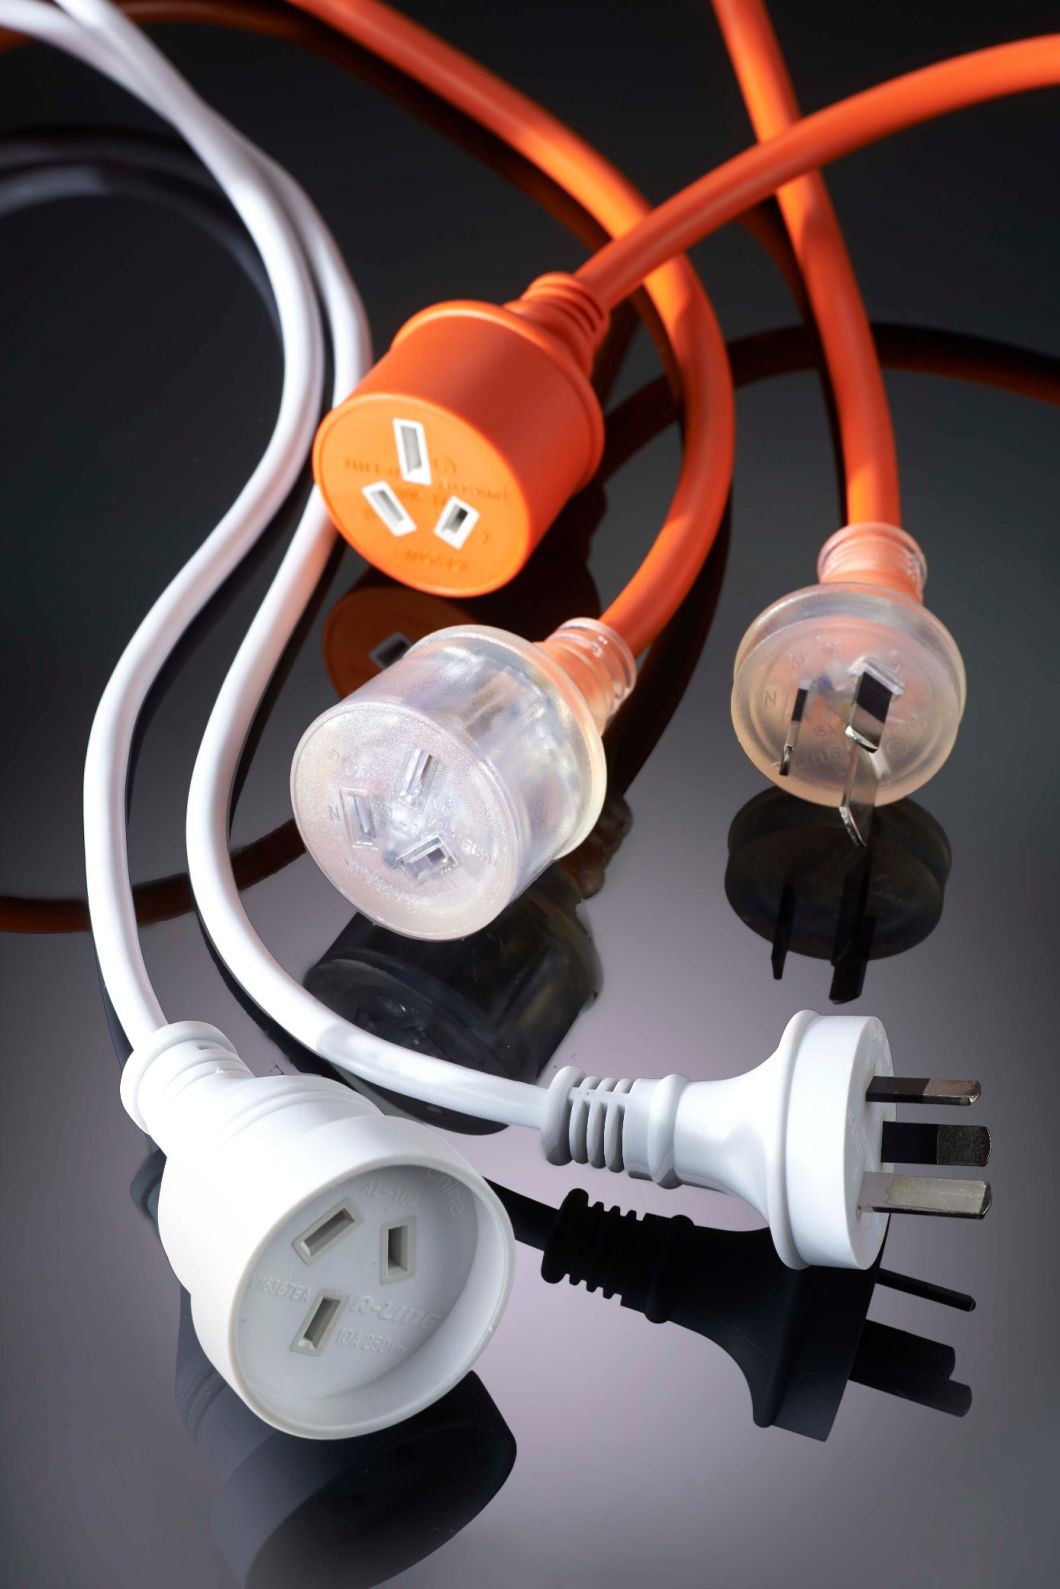 Australian Extension Cord with SAA Certification Power Cable